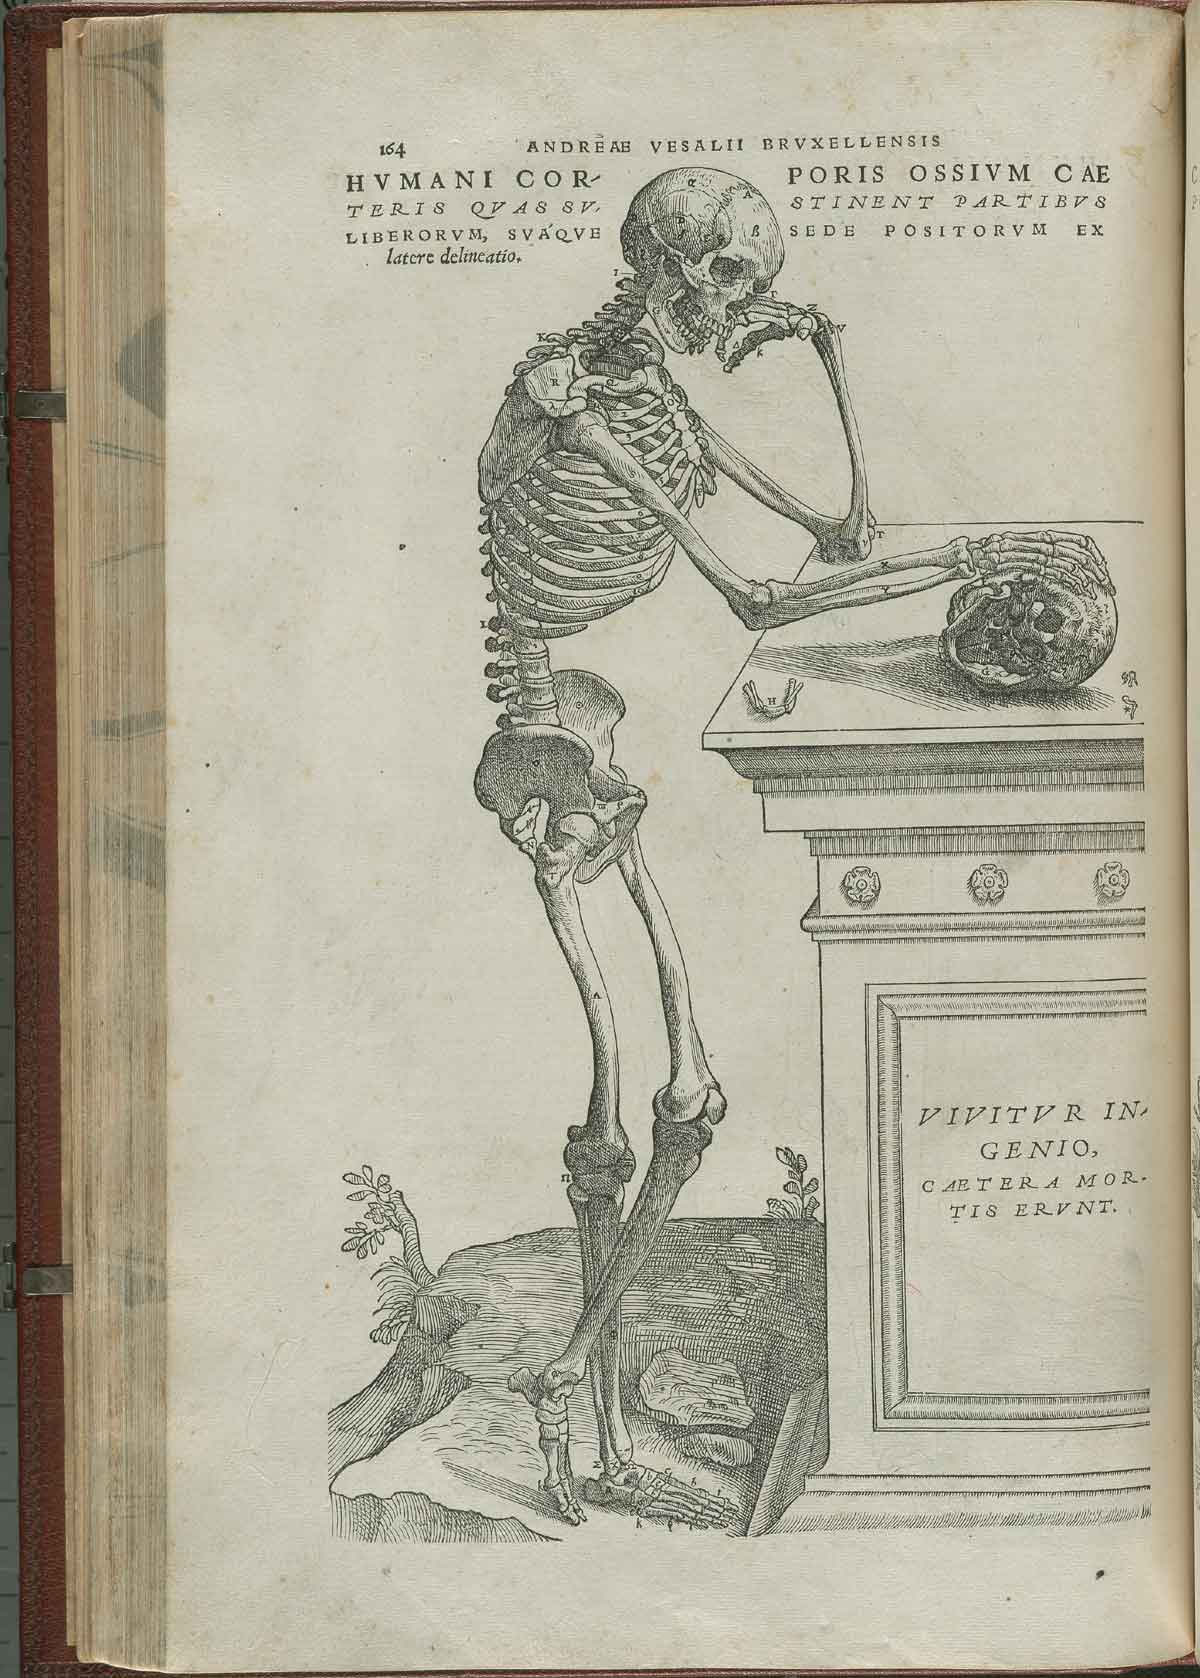 Page 164 of Andreas Vesalius' De corporis humani fabrica libri septem, featuring the illustrated woodcut of the full-length, side view of a skeleton, contemplating a skull.